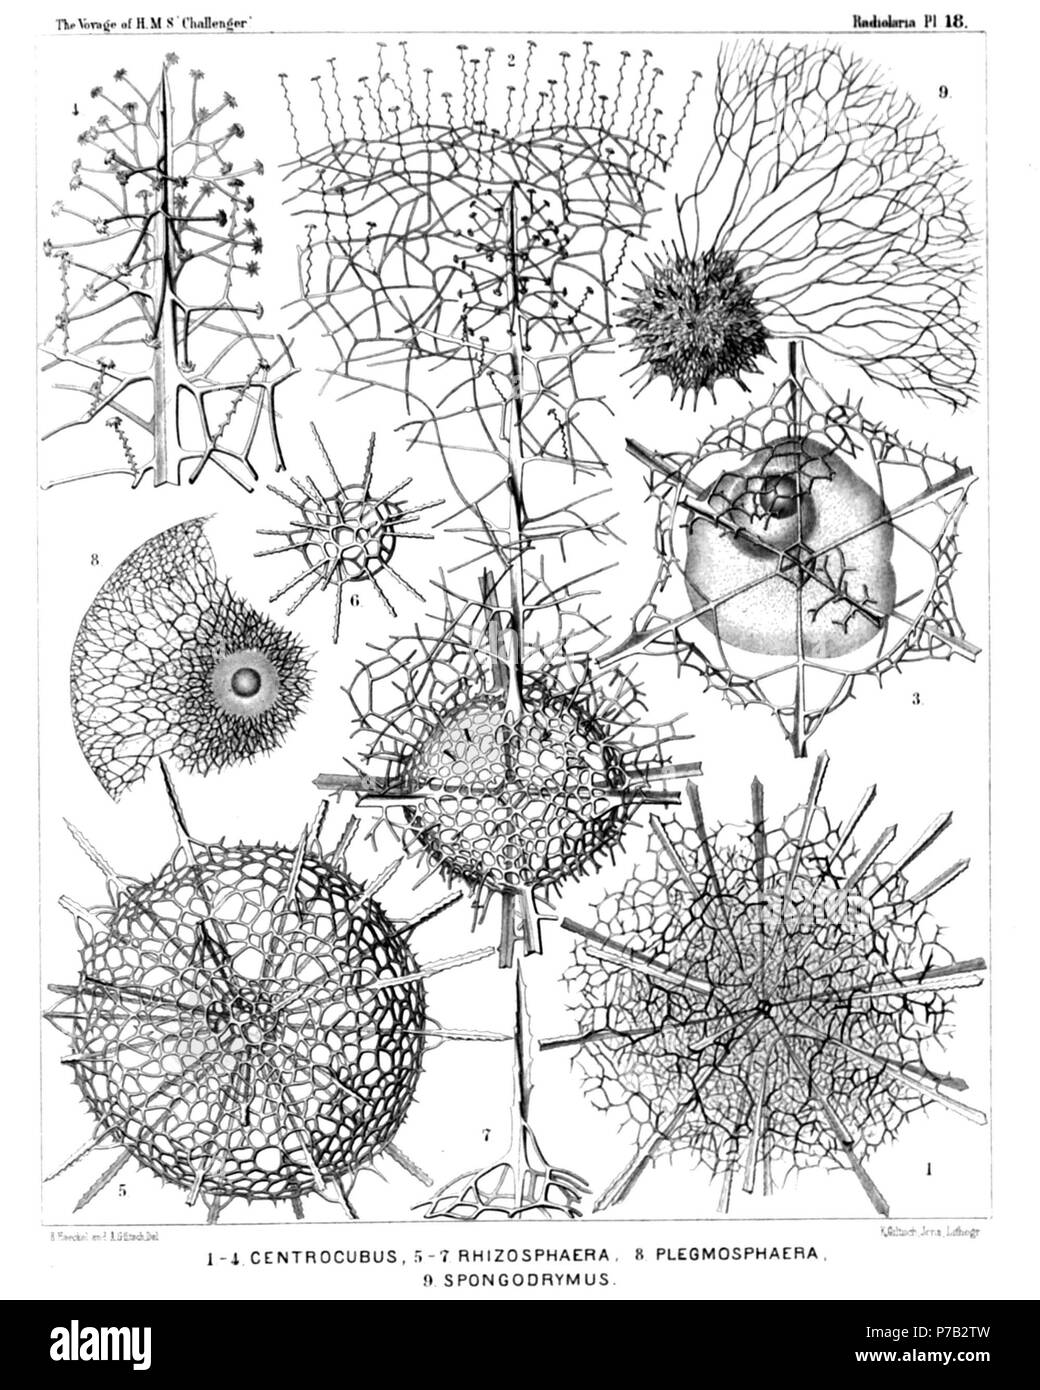 English: Illustration from Report on the Radiolaria collected by H.M.S. Challenger during the years 1873-1876. Part III. Original description follows:  Plate 18. Liosphærida et Astrosphærida.  Diam.  Fig. 1. Centrocubus cladostylus, n. sp., × 100  Fig. 2. Octodendron spathillatum, n. sp., × 300  The entire inner shell, but a small part only of the outer shell is represented.  Fig. 3. Octodendron cubocentron, n. sp., × 400  The central capsule (somewhat irregular by compression) exhibits a large excentric nucleus (probably dislocated artificially).  Fig. 4. Octodendron spathillatum, n. sp., × 8 Stock Photo